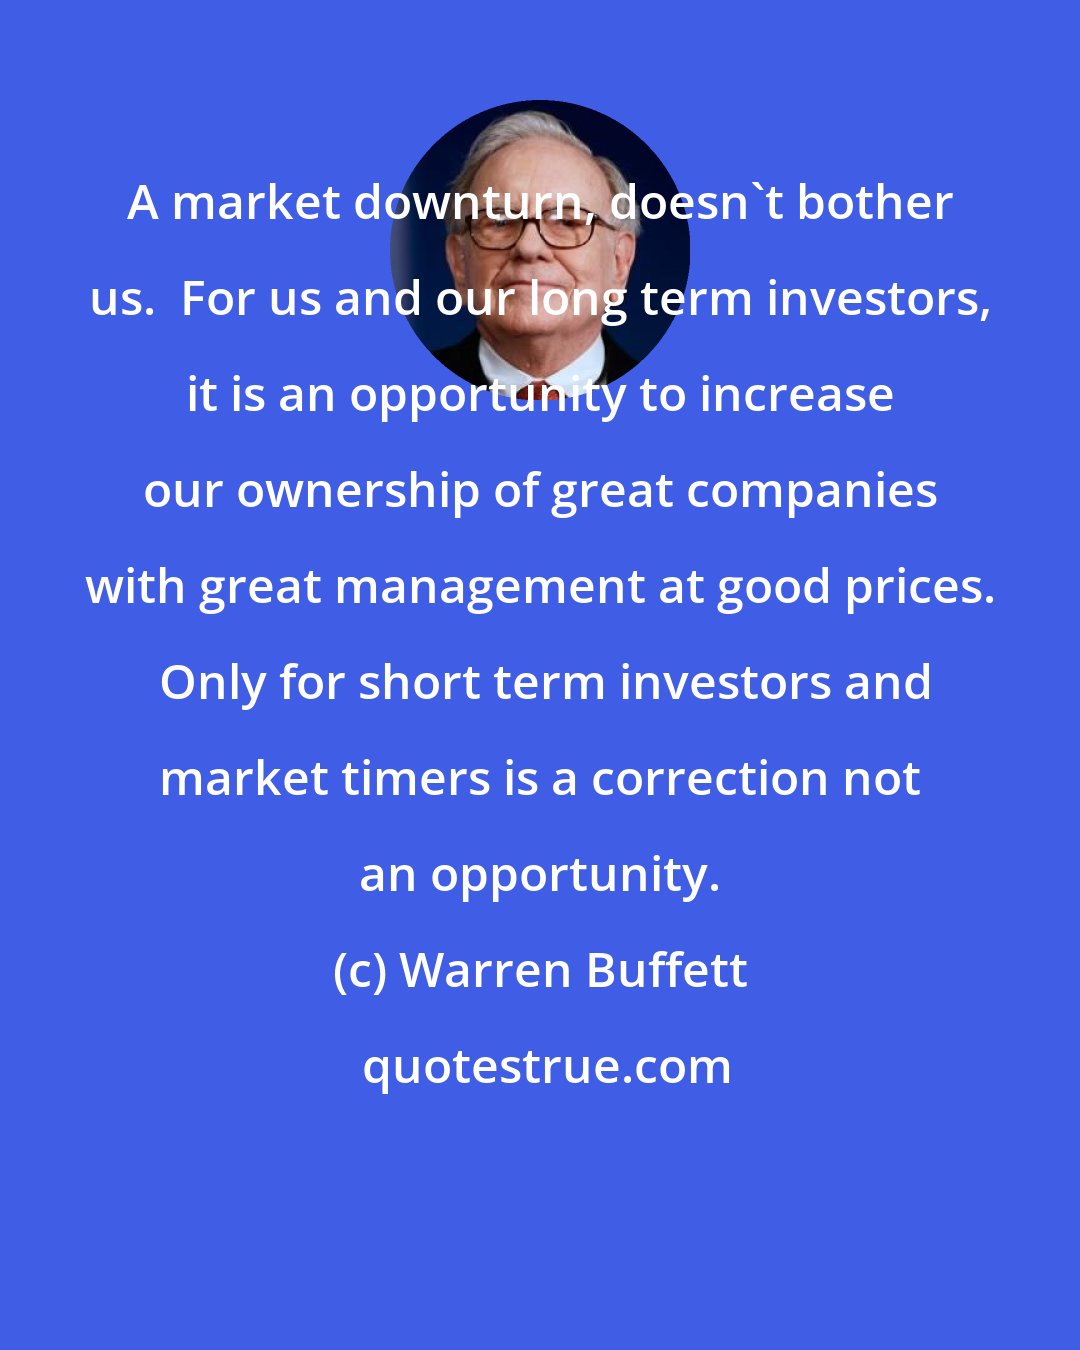 Warren Buffett: A market downturn, doesn't bother us.  For us and our long term investors, it is an opportunity to increase our ownership of great companies with great management at good prices.  Only for short term investors and market timers is a correction not an opportunity.